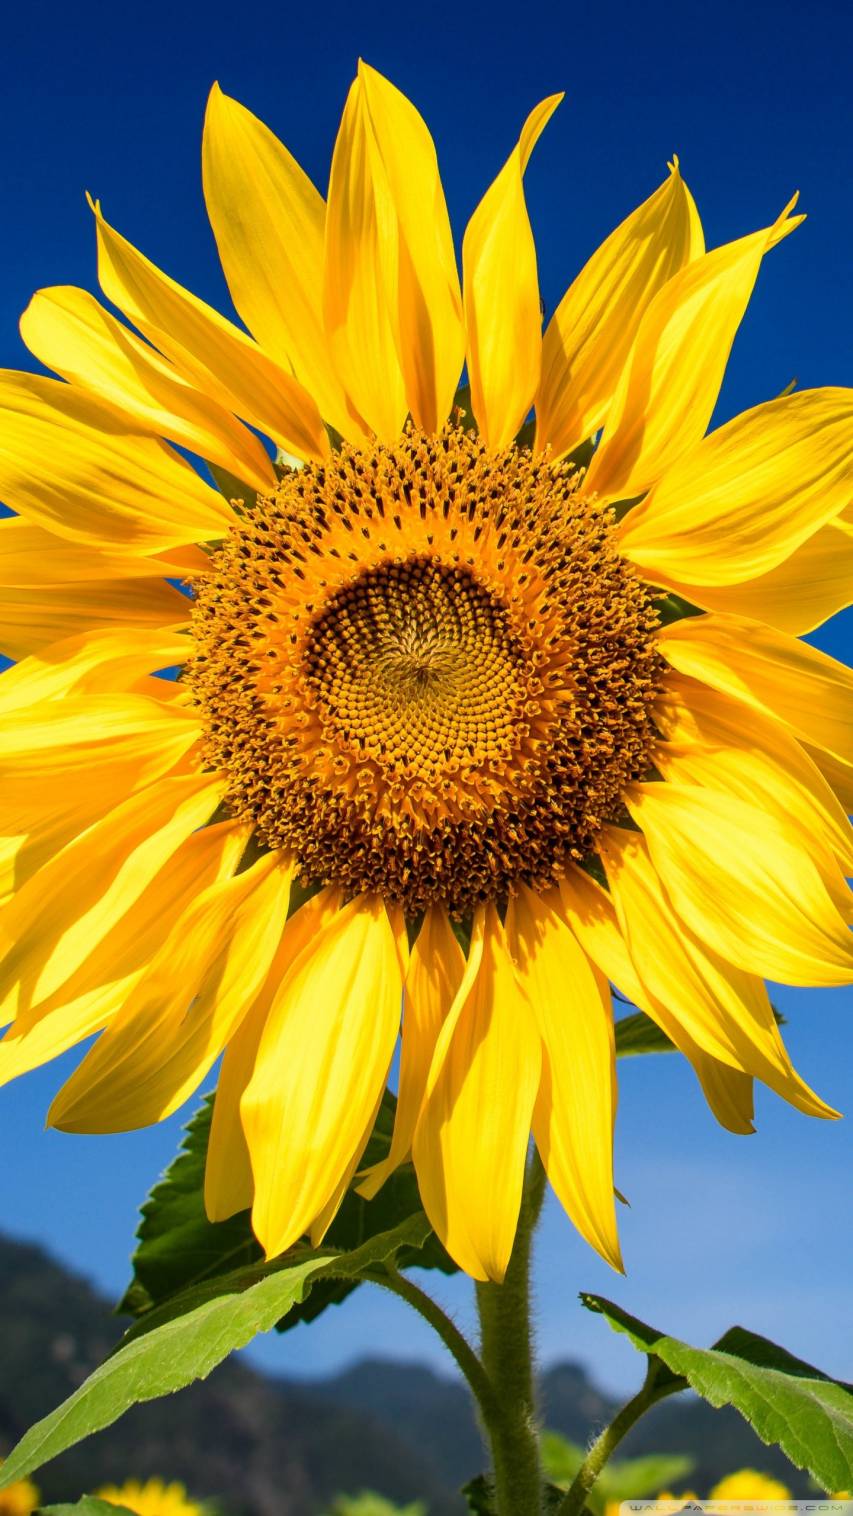 Sunflower Wallpapers and Backgrounds image Free Download